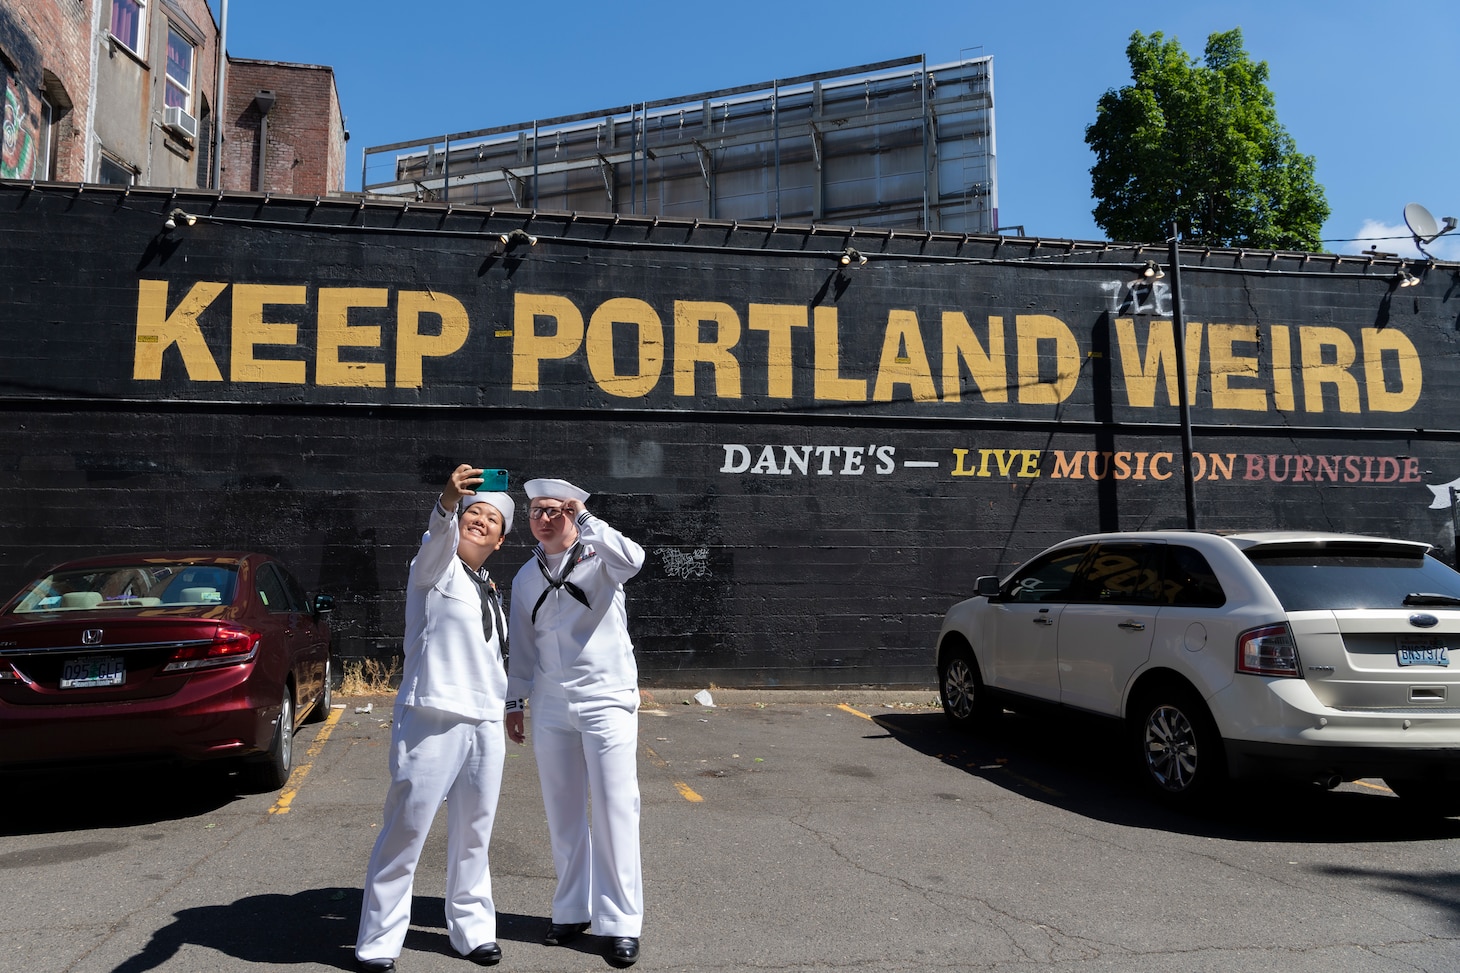 Hospital Corpsman 1st Class Stephanie Fanchiang and Sonar Technician 2nd Class Greylan Smith, both assigned to USS Kansas City (LCS 22), take a selfie in front of a sign during Portland Fleet Week in Portland, Oregon, June 11, 2023. Portland Fleet Week is a time-honored celebration of the sea services and provides an opportunity for the citizens of Oregon to meet Sailors, Marines and Coast Guardsmen, as well as witness firsthand the latest capabilities of today's maritime services. (U.S. Navy photo by Mass Communication Specialist Seaman Sophia H. Bumps)